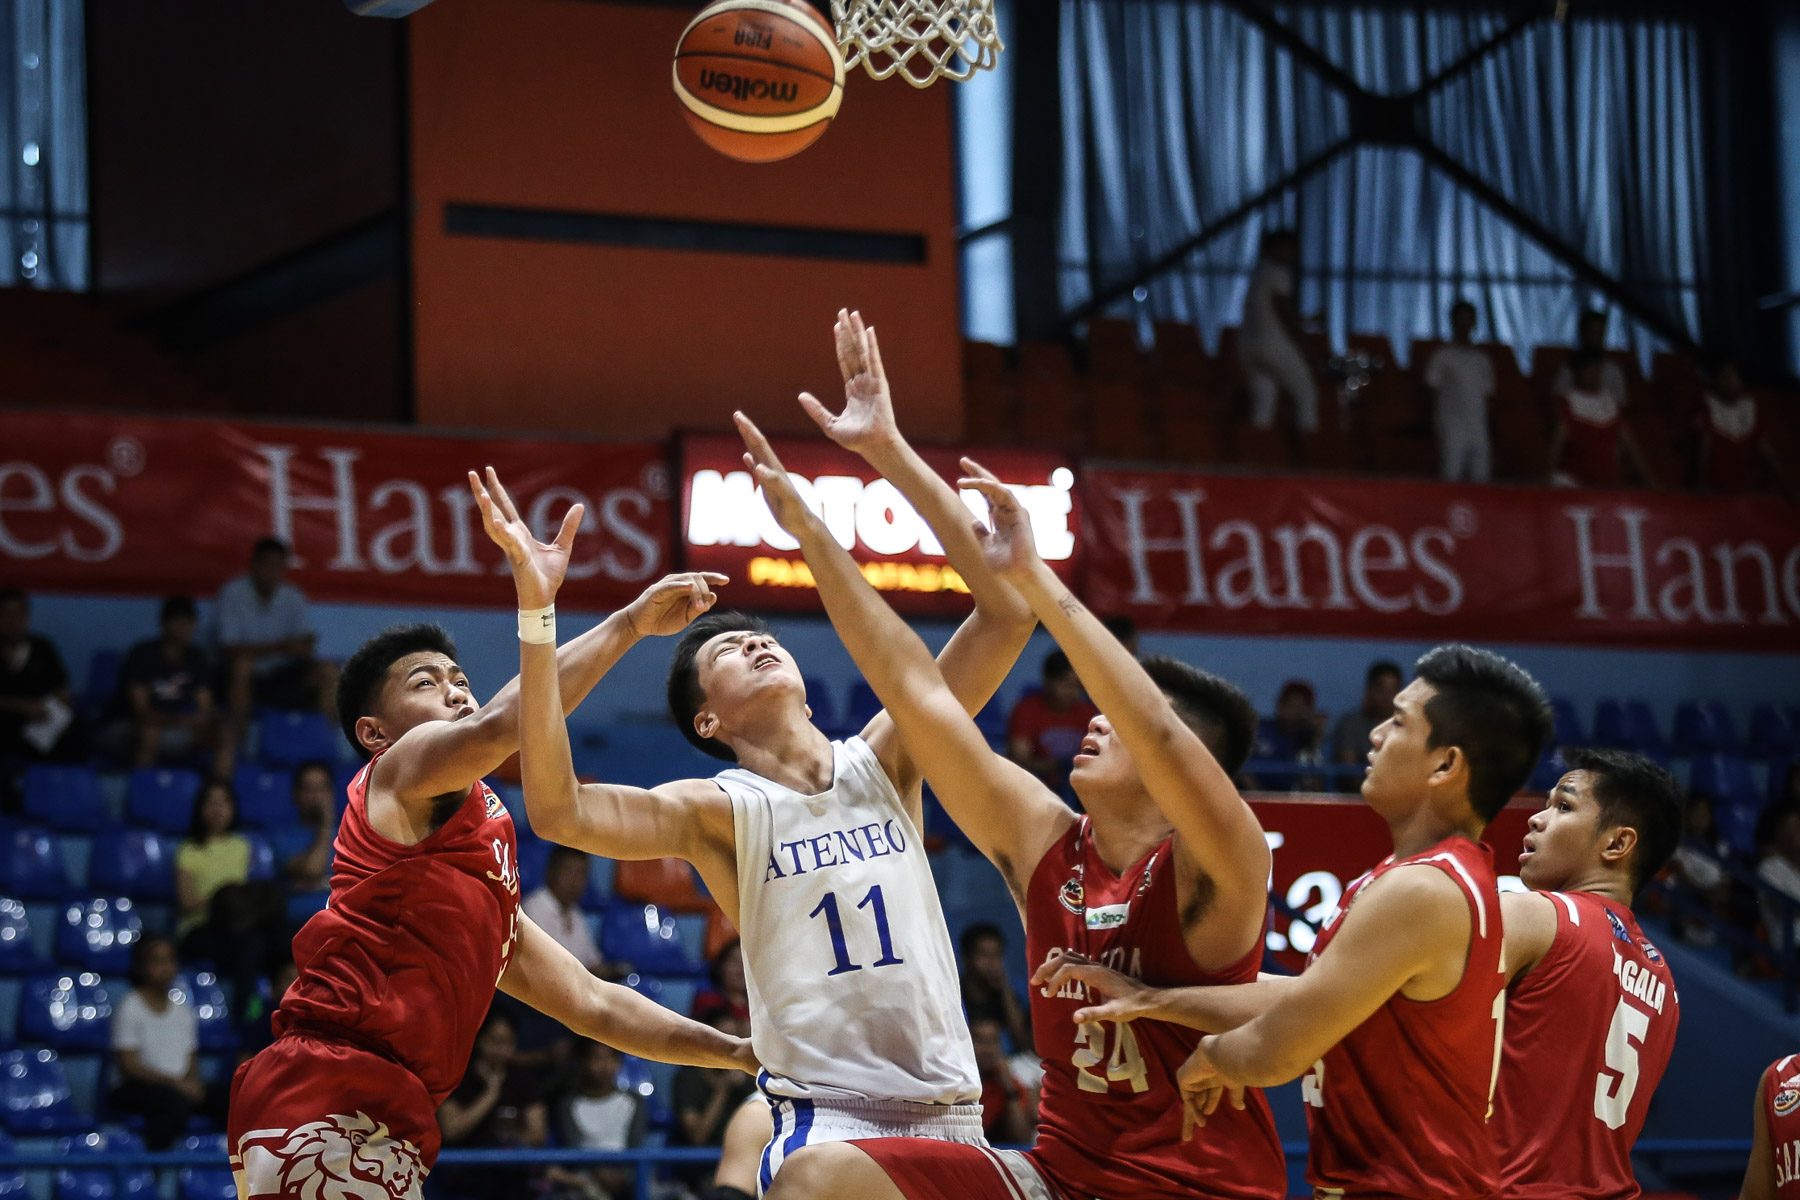 Kai Sotto towers above the competition for Batang Gilas